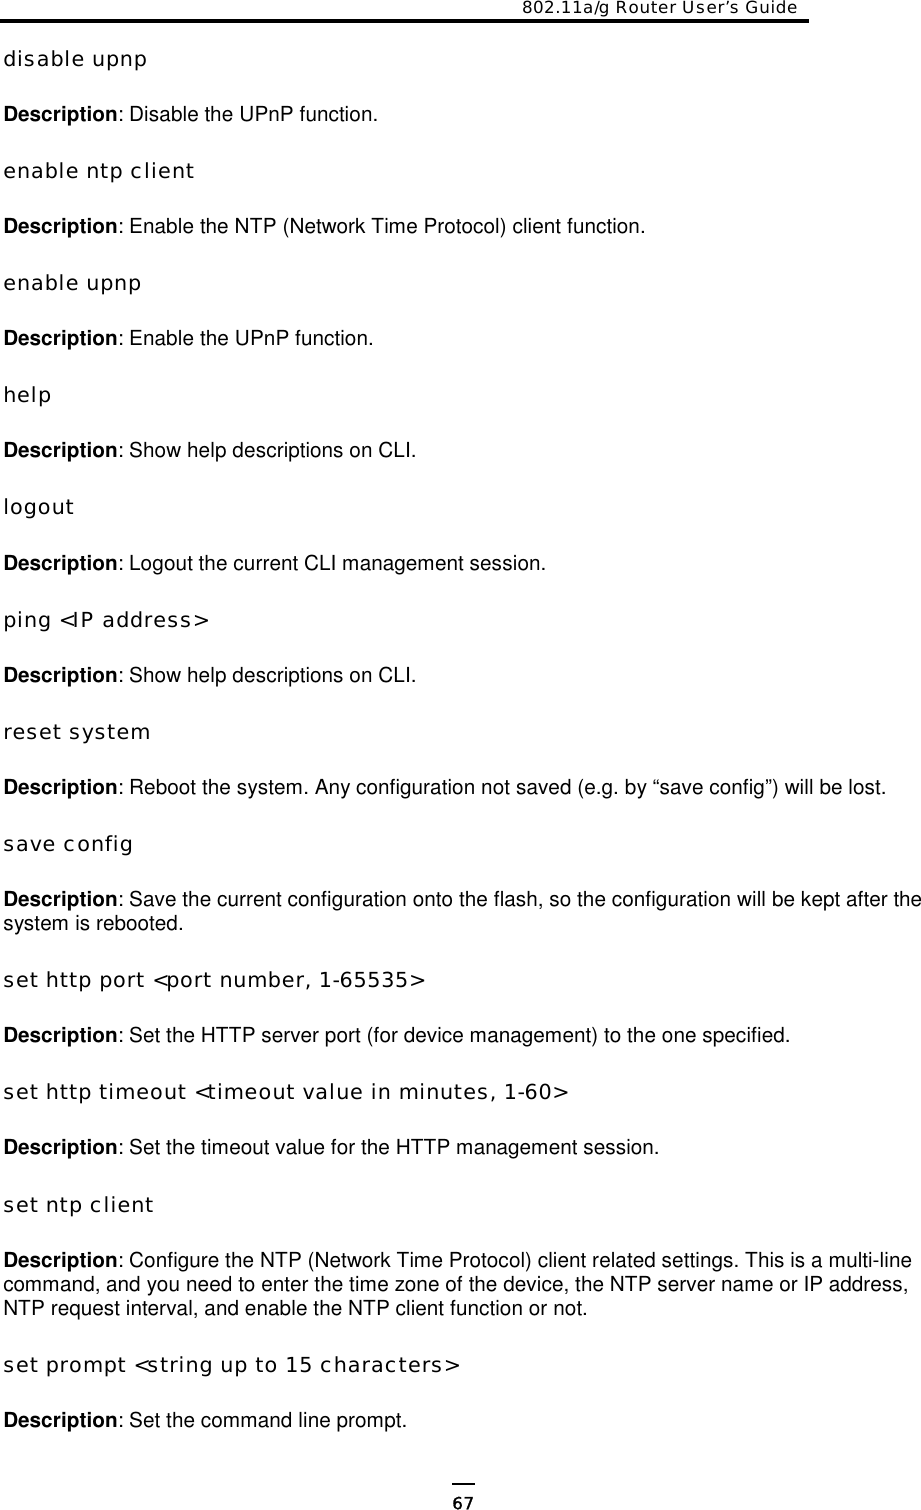 802.11a/g Router User’s Guide  disable upnp  Description: Disable the UPnP function.  enable ntp client  Description: Enable the NTP (Network Time Protocol) client function.  enable upnp  Description: Enable the UPnP function.  help  Description: Show help descriptions on CLI.  logout  Description: Logout the current CLI management session.  ping &lt;IP address&gt;  Description: Show help descriptions on CLI.  reset system  Description: Reboot the system. Any configuration not saved (e.g. by “save config”) will be lost.  save config  Description: Save the current configuration onto the flash, so the configuration will be kept after the system is rebooted.  set http port &lt;port number, 1-65535&gt;  Description: Set the HTTP server port (for device management) to the one specified.  set http timeout &lt;timeout value in minutes, 1-60&gt;  Description: Set the timeout value for the HTTP management session.  set ntp client  Description: Configure the NTP (Network Time Protocol) client related settings. This is a multi-line command, and you need to enter the time zone of the device, the NTP server name or IP address, NTP request interval, and enable the NTP client function or not.   set prompt &lt;string up to 15 characters&gt;  Description: Set the command line prompt.  67